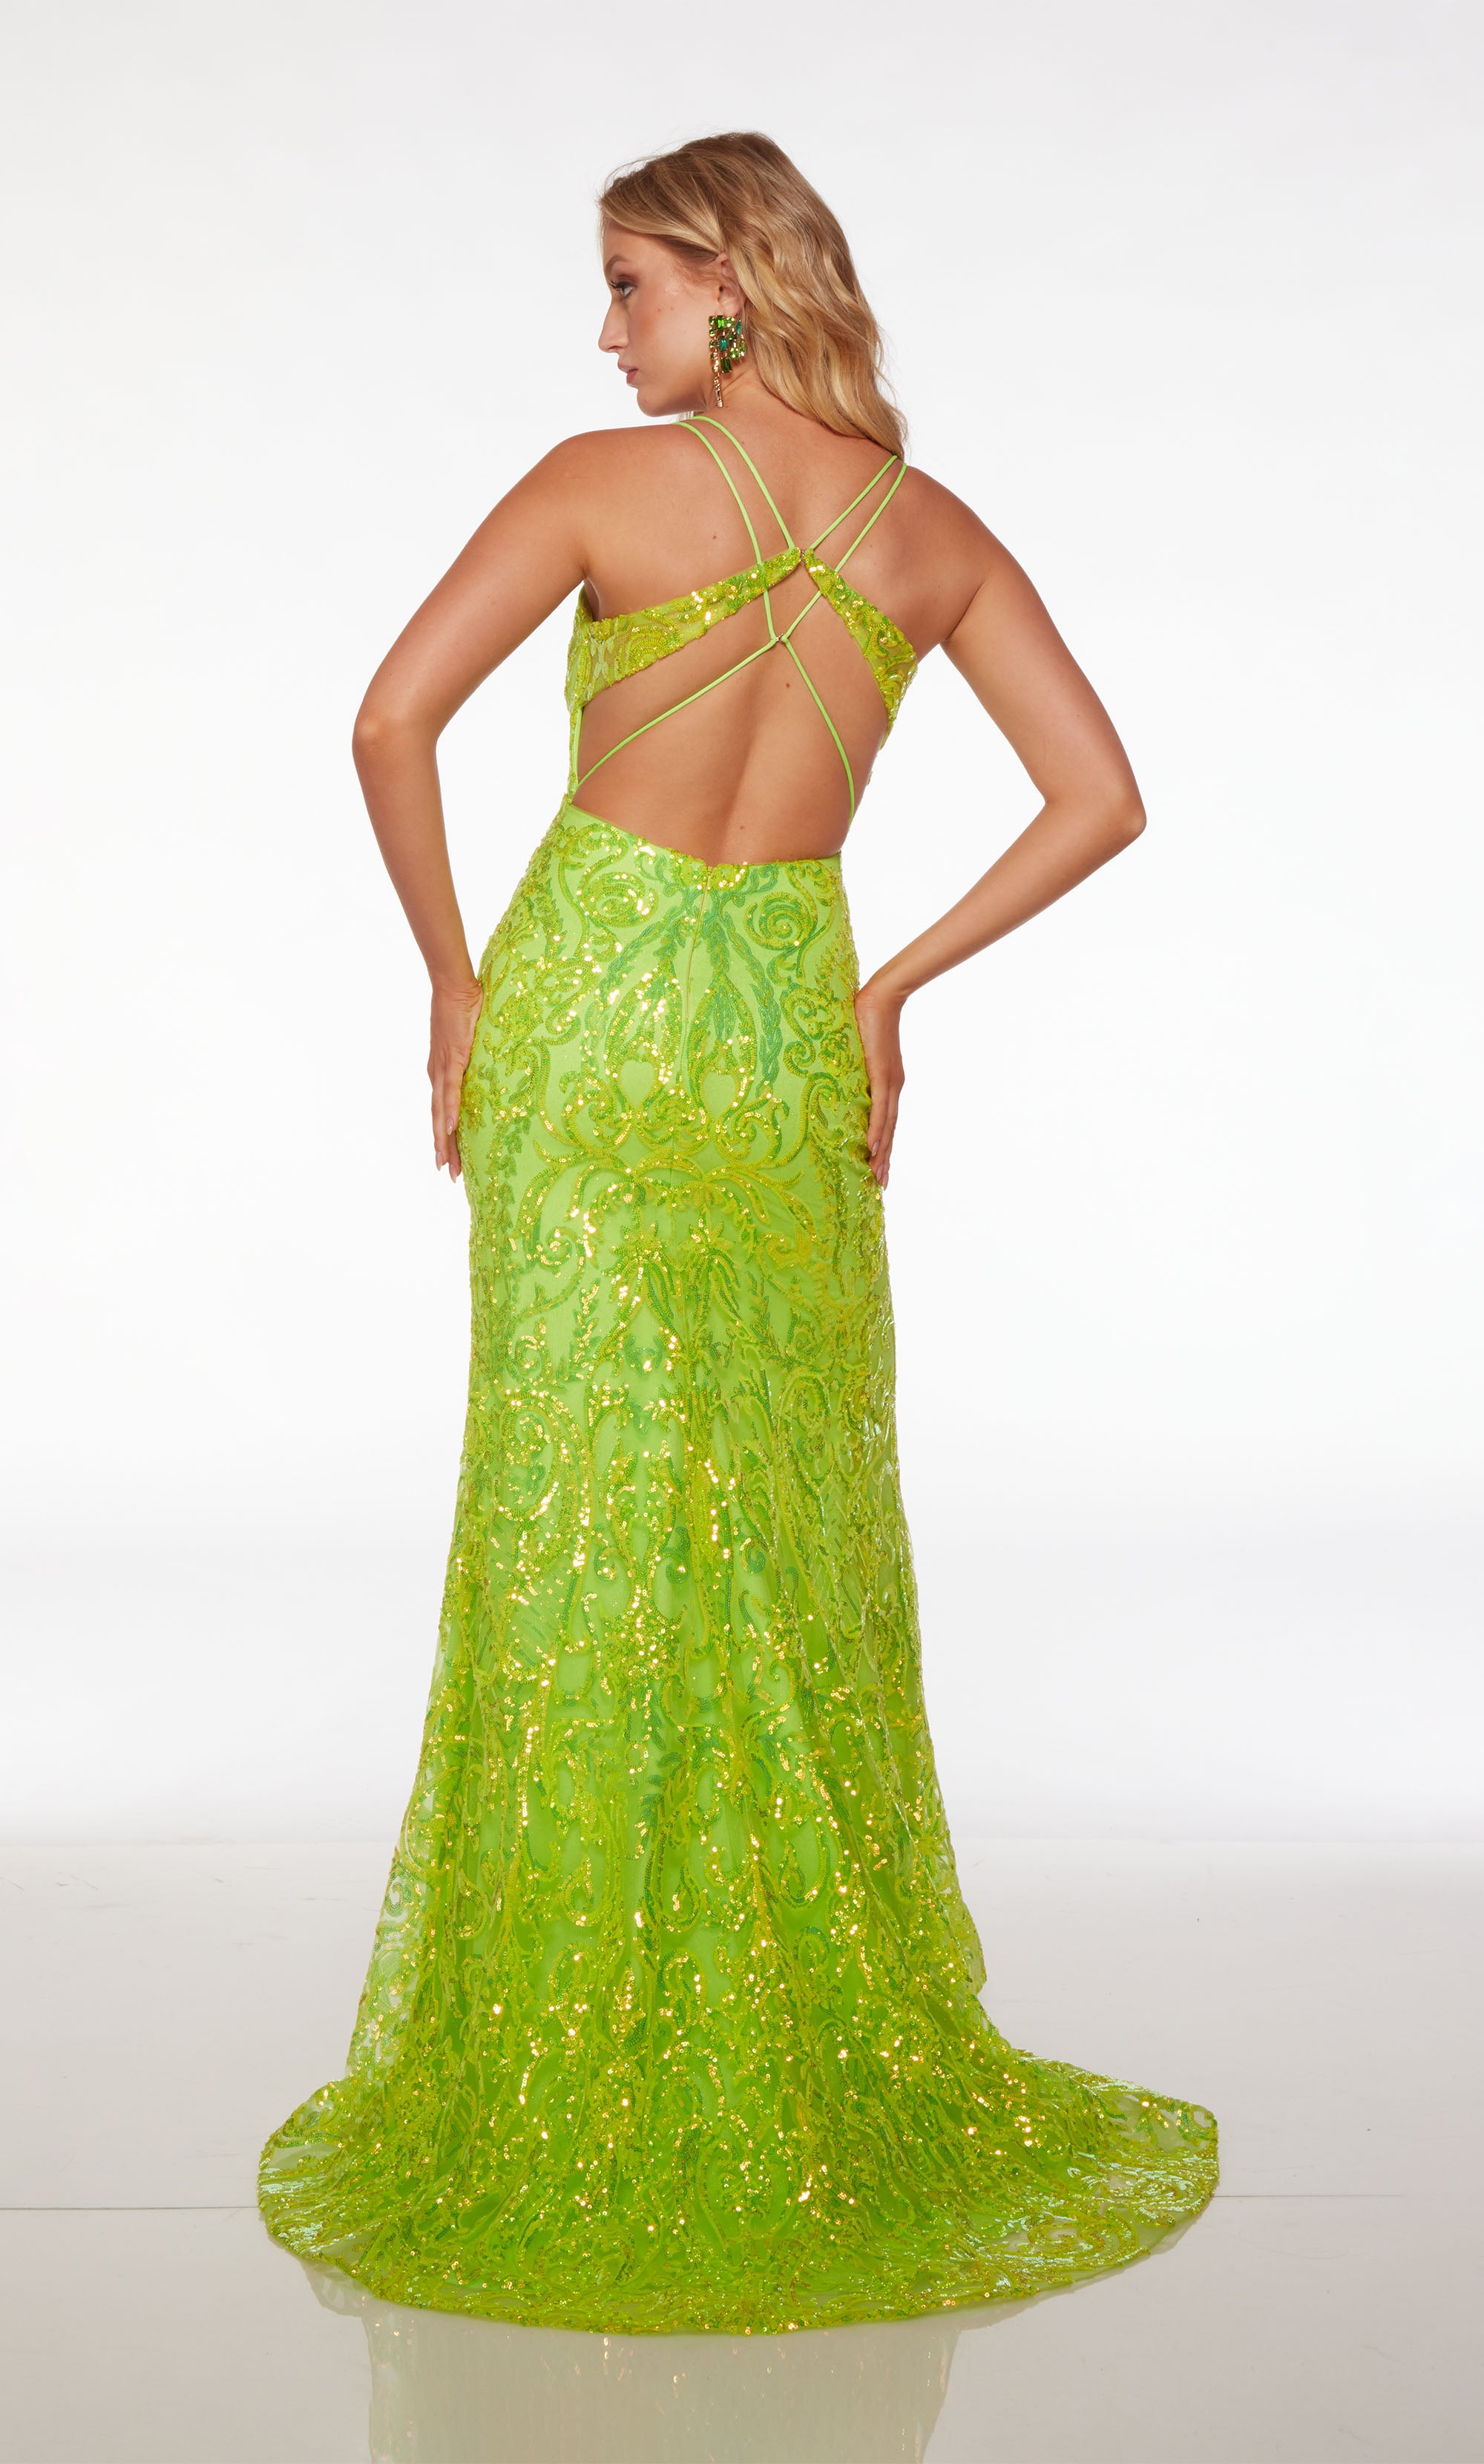 Green prom dress: form-fitting, plunging neckline, high slit, dual spaghetti straps, strappy open back, paisley sequin design, and an stylish train.